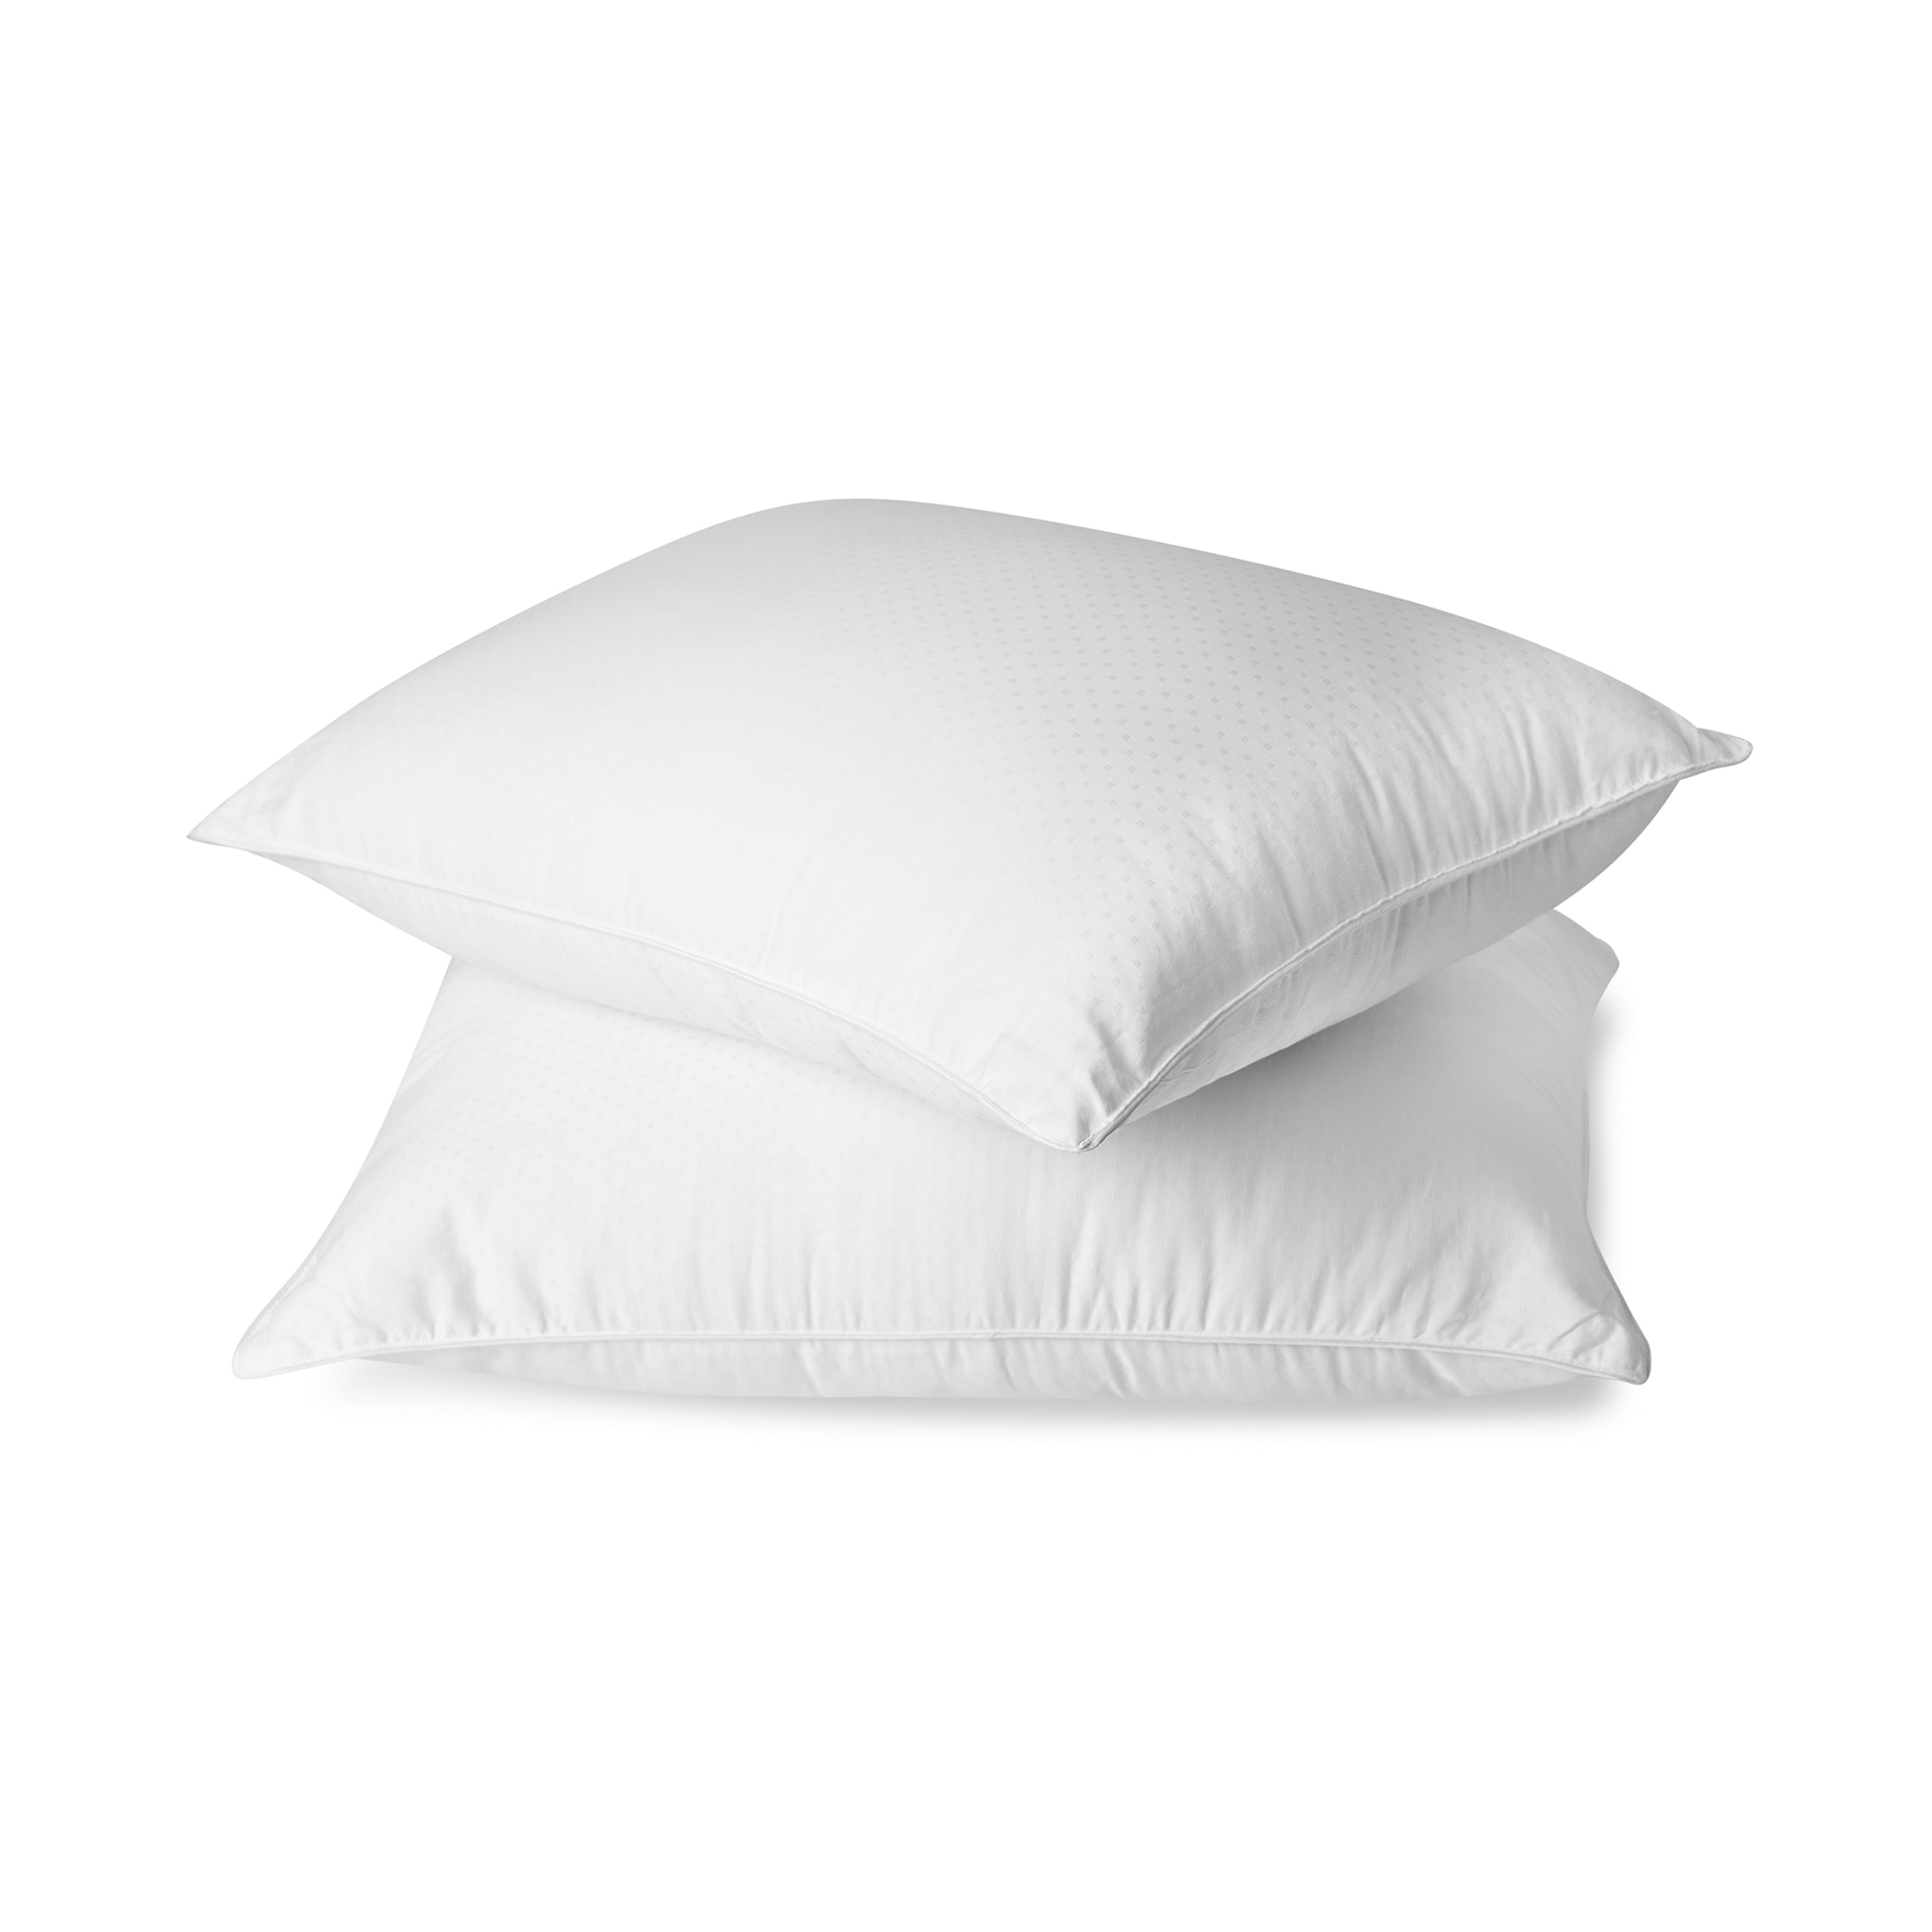 Set of 2 Queen/Standard Bed Pillows for Sleeping Luxury Plush Down Alternative 